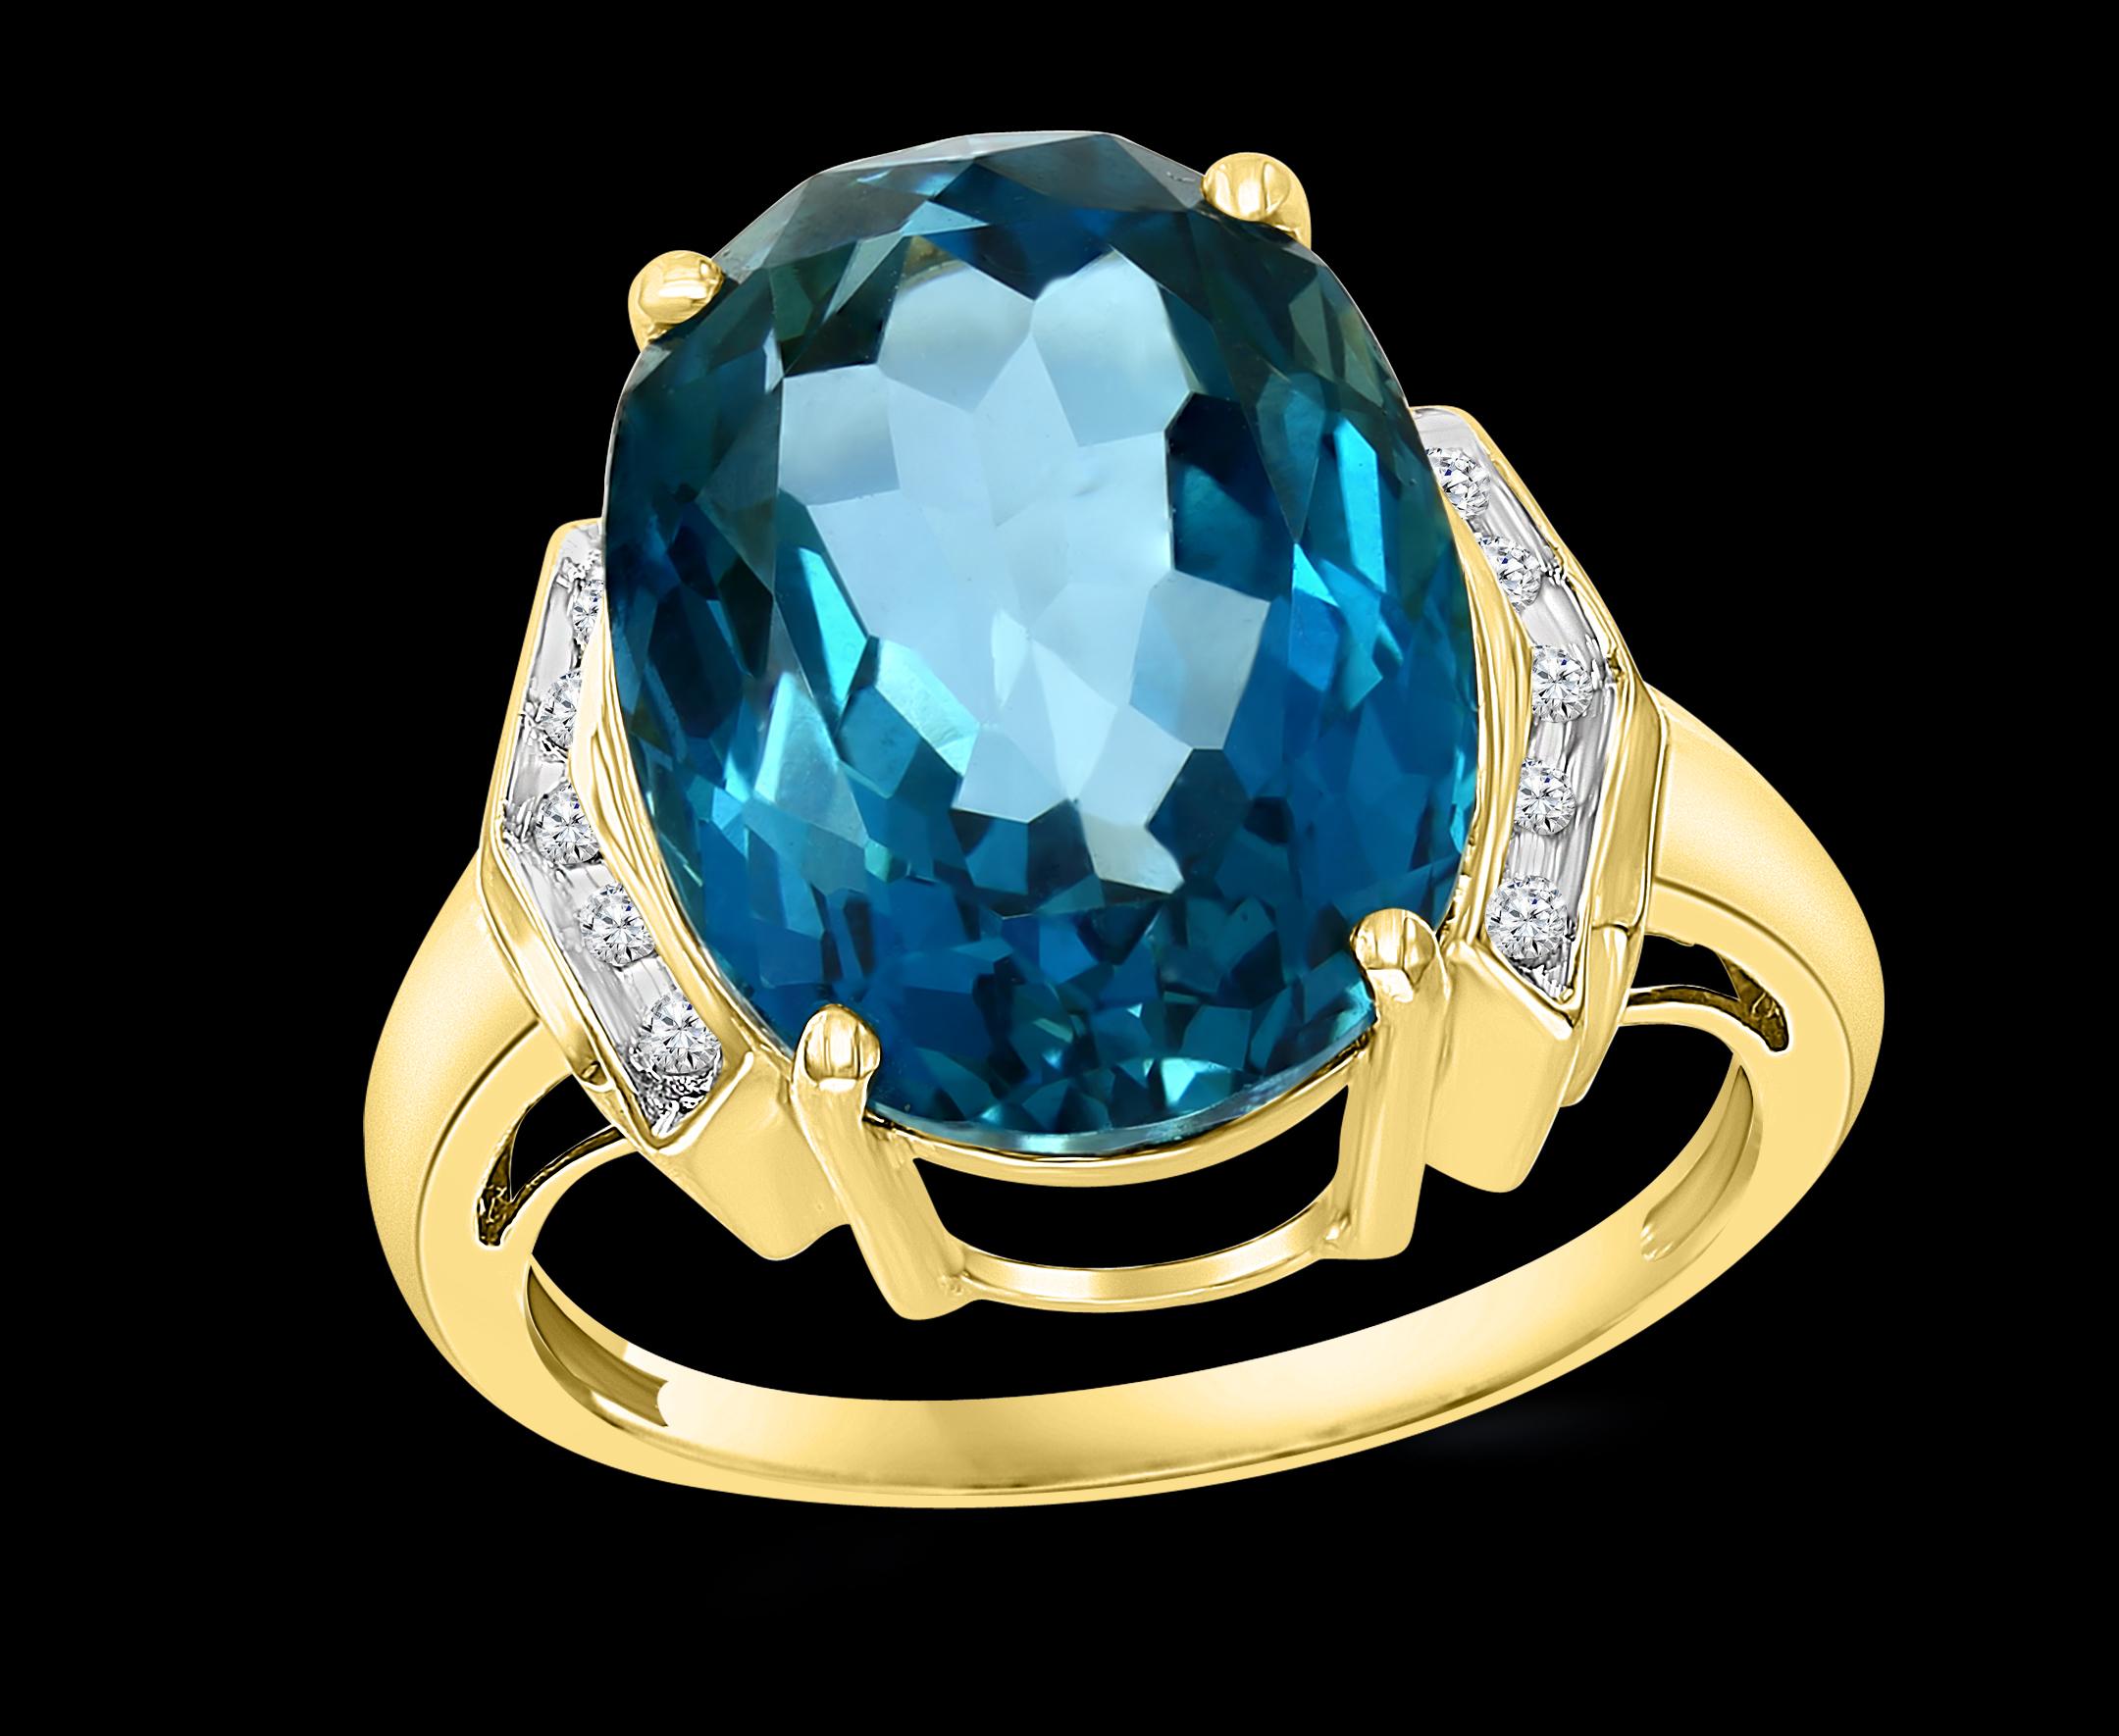 Approximately 7 Carat Natural Blue Topaz & Diamond Cocktail Ring 14 Karat Yellow Gold, Estate
A classic, Cocktail ring 
Huge 7 Carat of very clean no inclusion  Blue Topaz Oval shape , full of luster and shine with dark color
Approximately  0.25